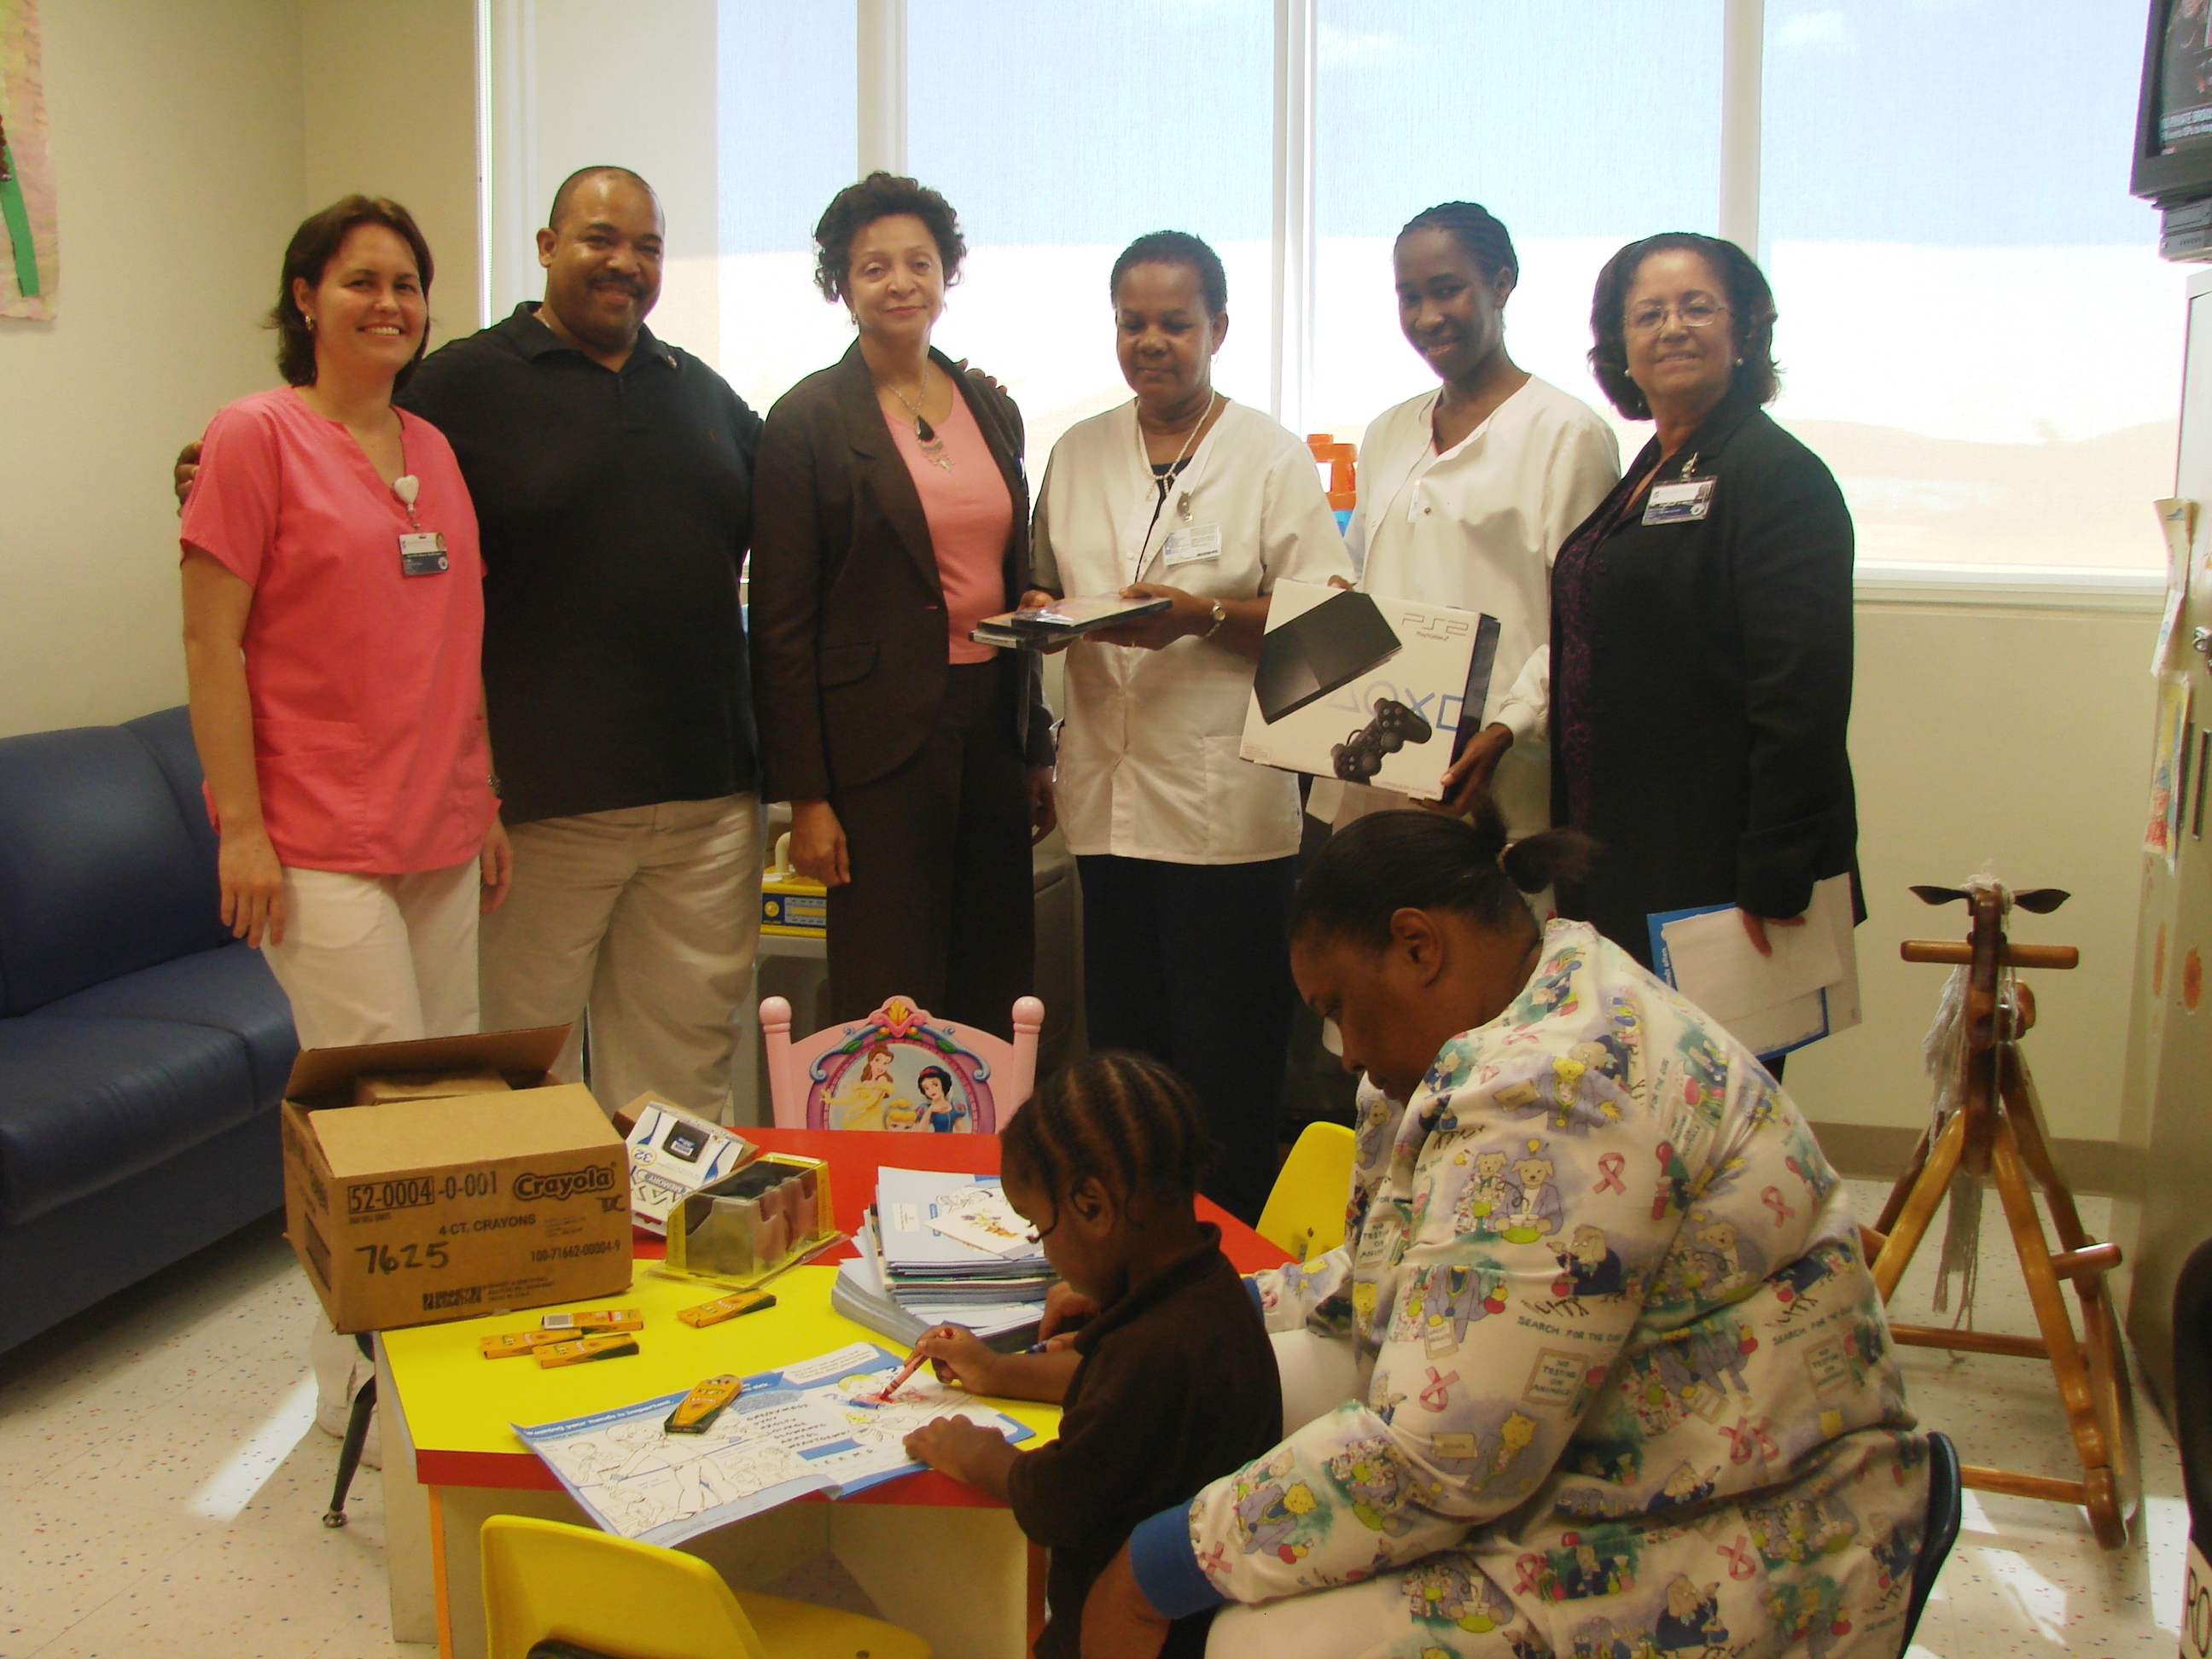 Pictured left to right: Jennifer Stefferson, R.N.; Thomas Boatwright, past president, Rotary Sunrise; Angela Rennalls-Atkinson, M.B.S., M.S.R.N., chief operating officer; Eunice Gumbs, R.N., clinical care coordinator;  Emily Eloi-Henderson, R.N., assistant head nurse for pediatrics; Elizabeth Harris, interim chief executive officer, RLSMC; Janice Lake, C.A.N.; and a little visitor to the Pediatric Unit..